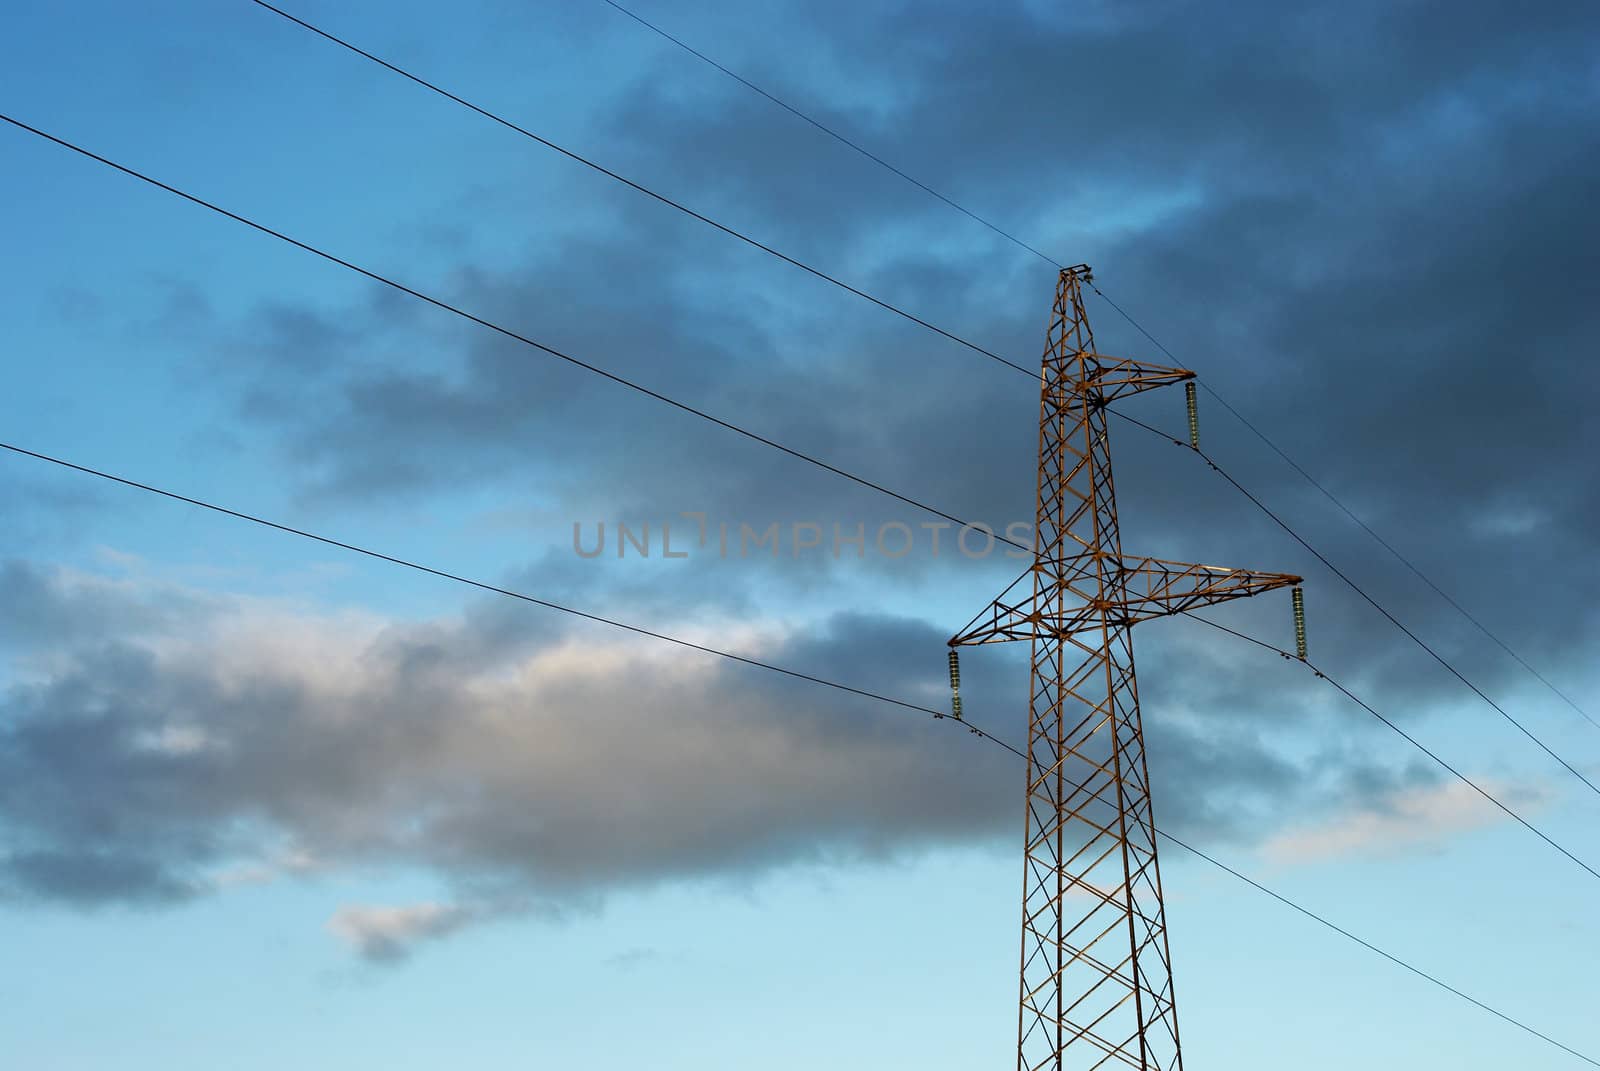 Hight voltage line by SoWin